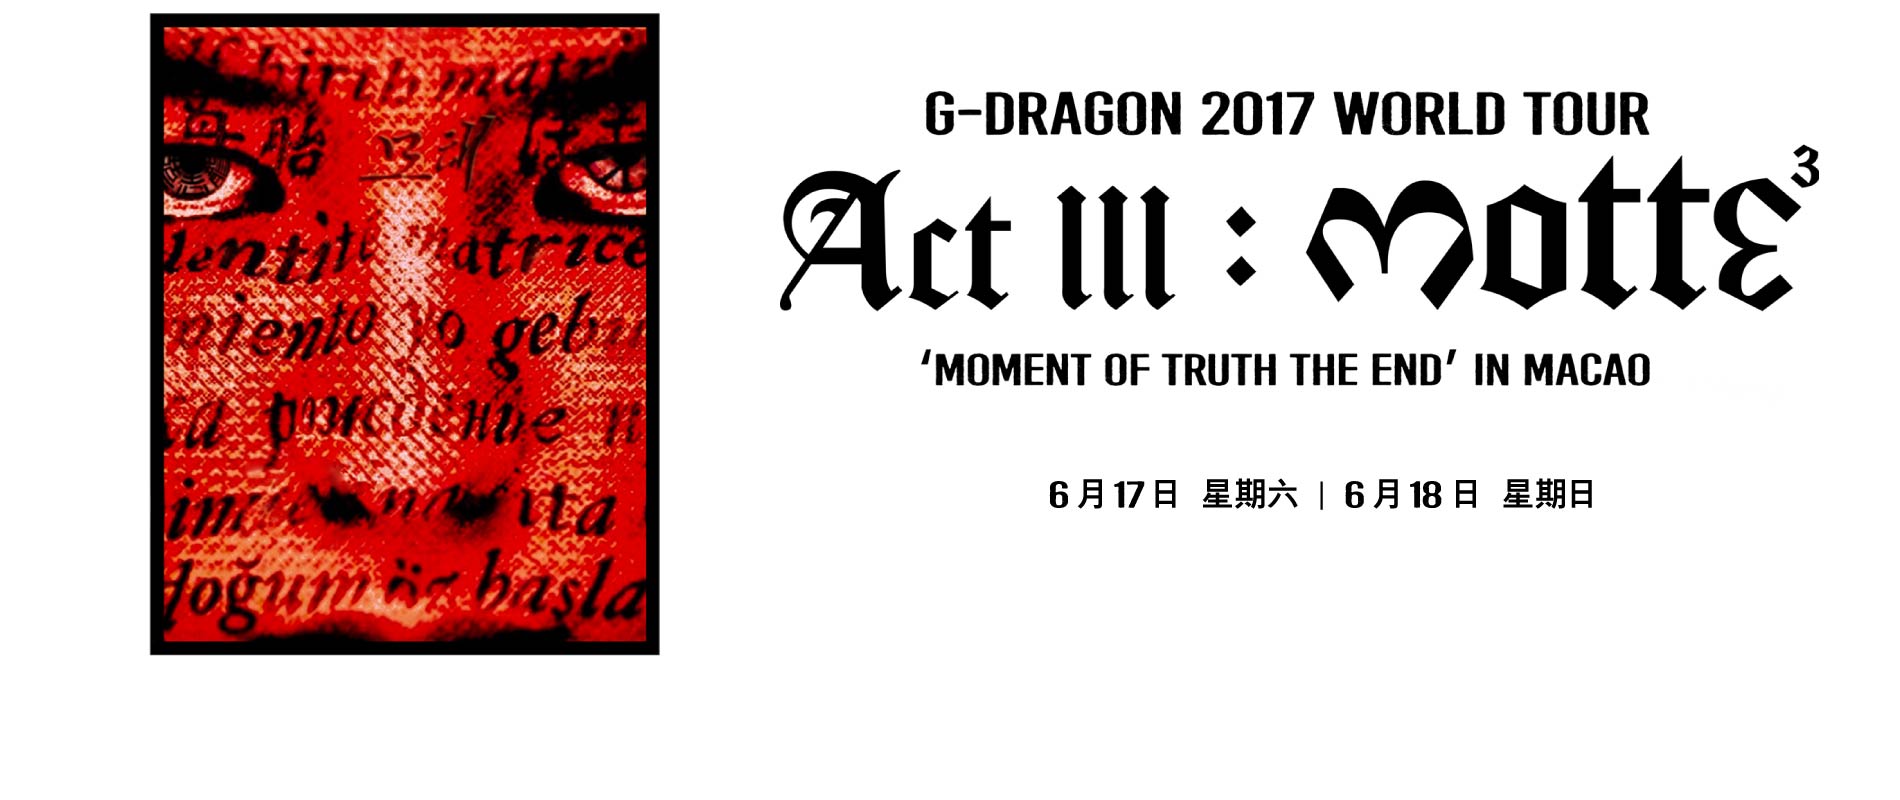 G-DRAGON 2017 WORLD TOUR IN MACAO